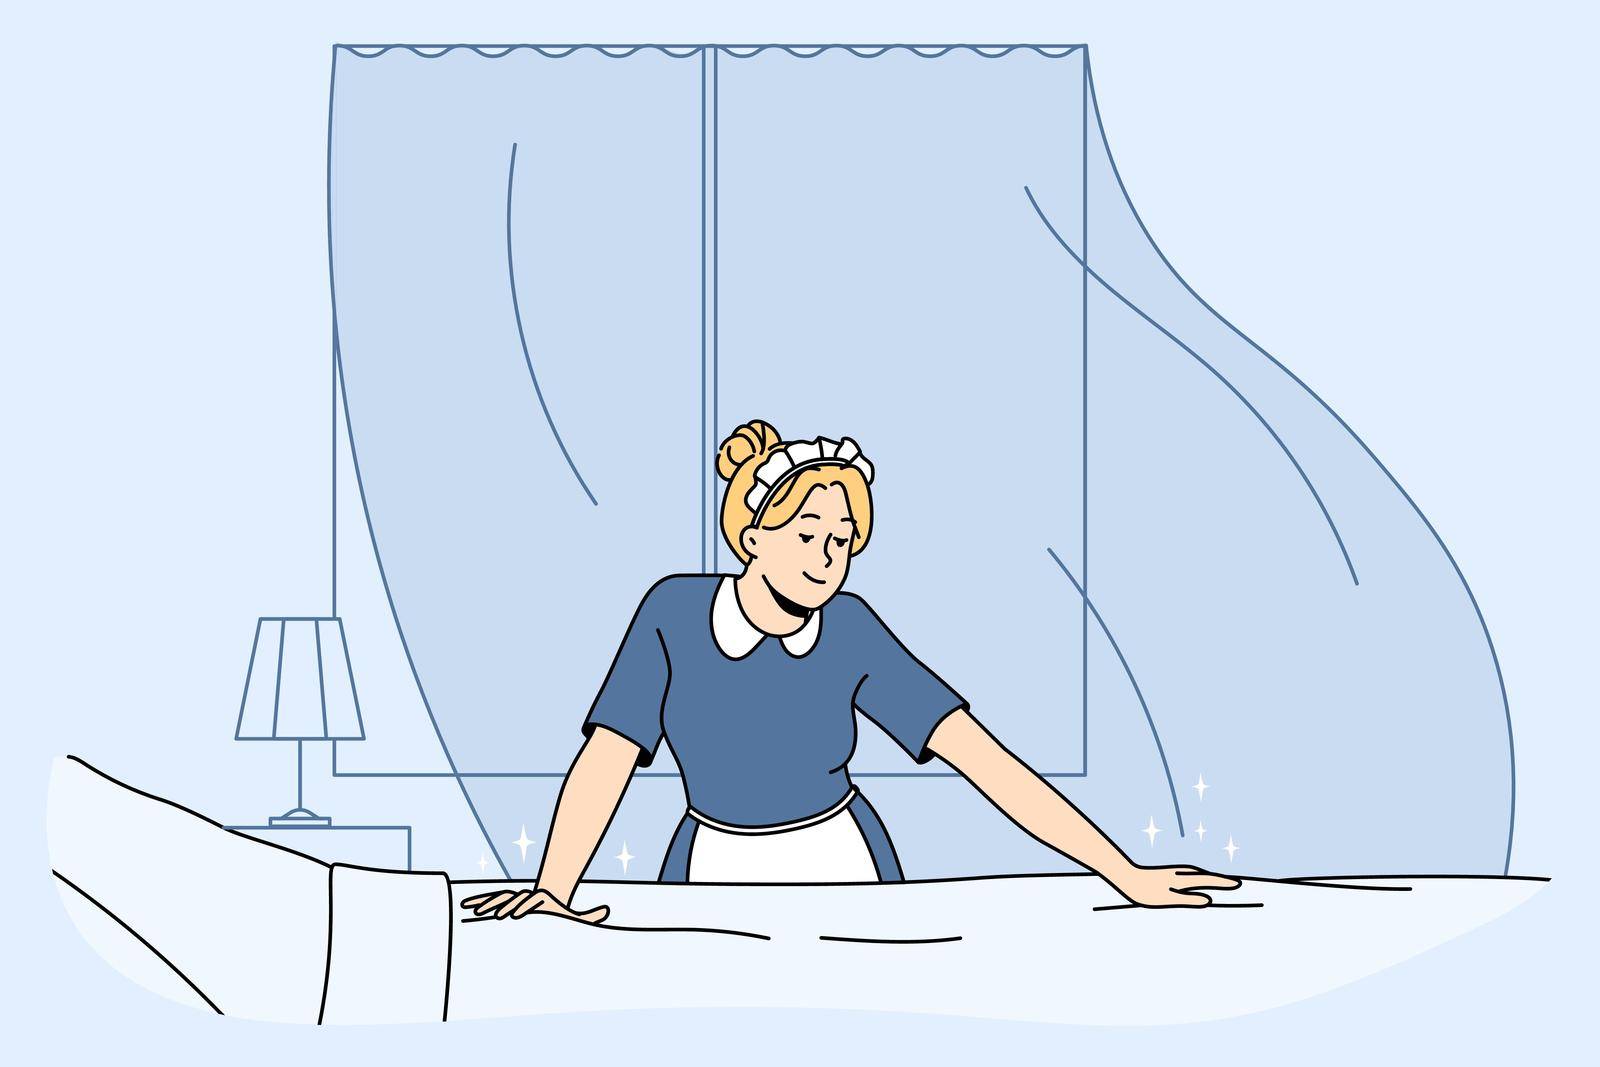 Maid changing bedding cleaning hotel room. Housekeeper in uniform working. Housekeeping service. Vector illustration.